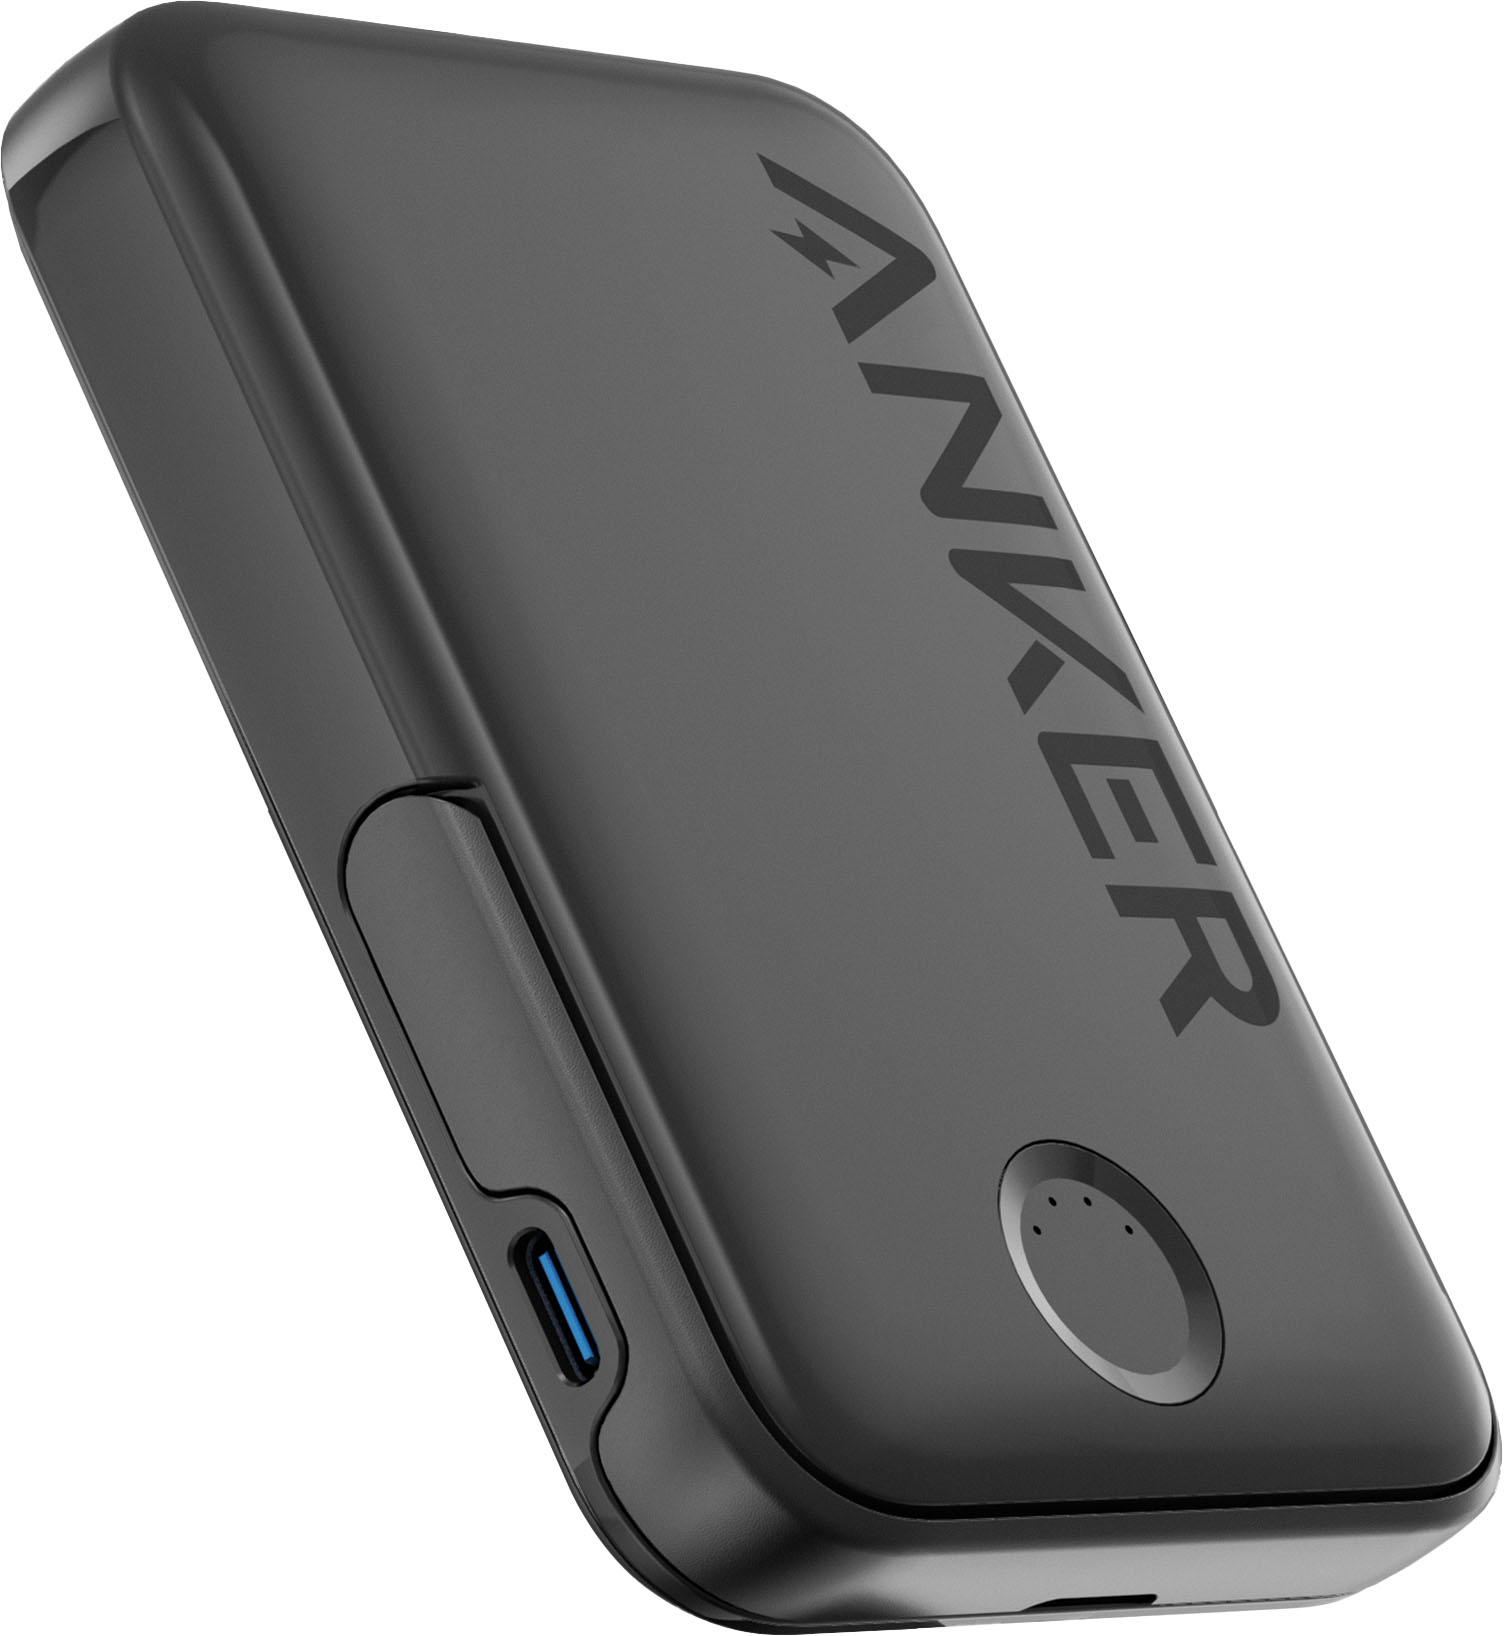 Anker Nano Power Bank with Built-in Foldable USB-C Connector Black  A1653H11-1 - Best Buy